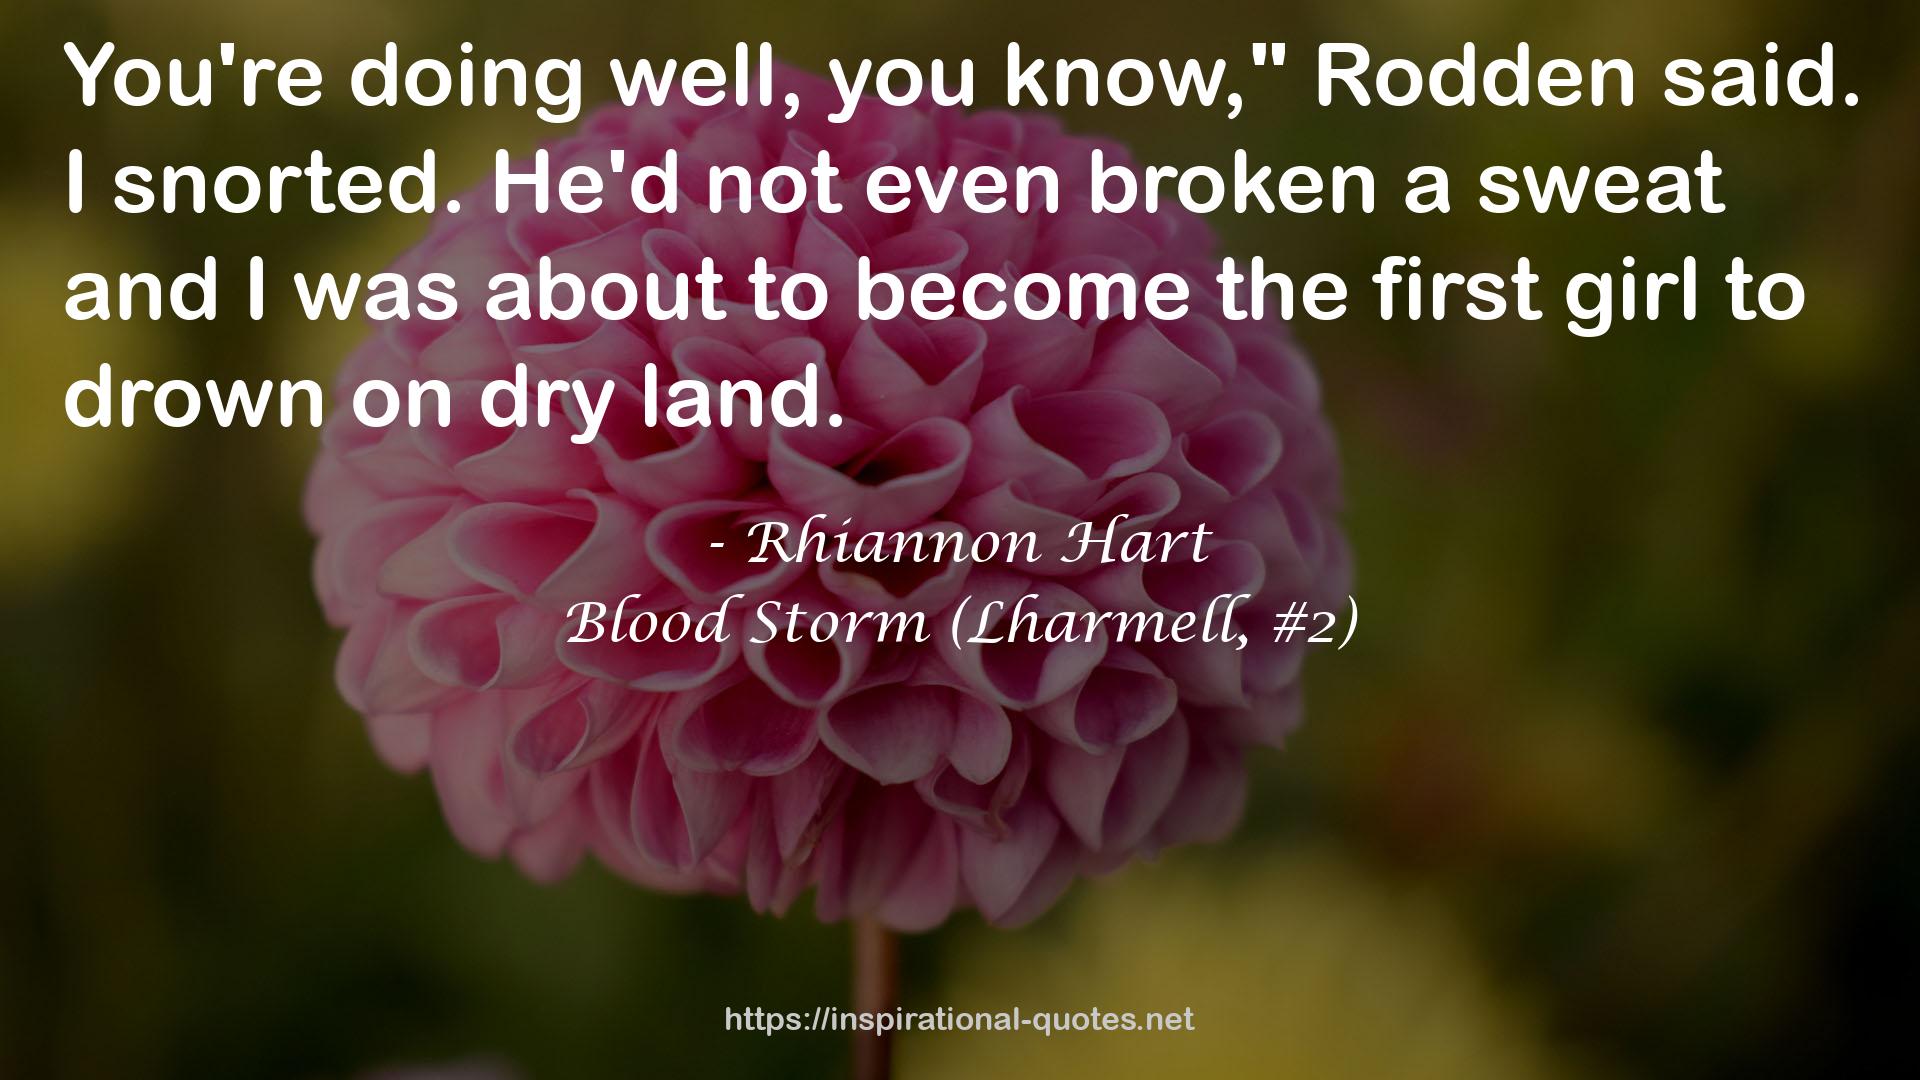 Blood Storm (Lharmell, #2) QUOTES